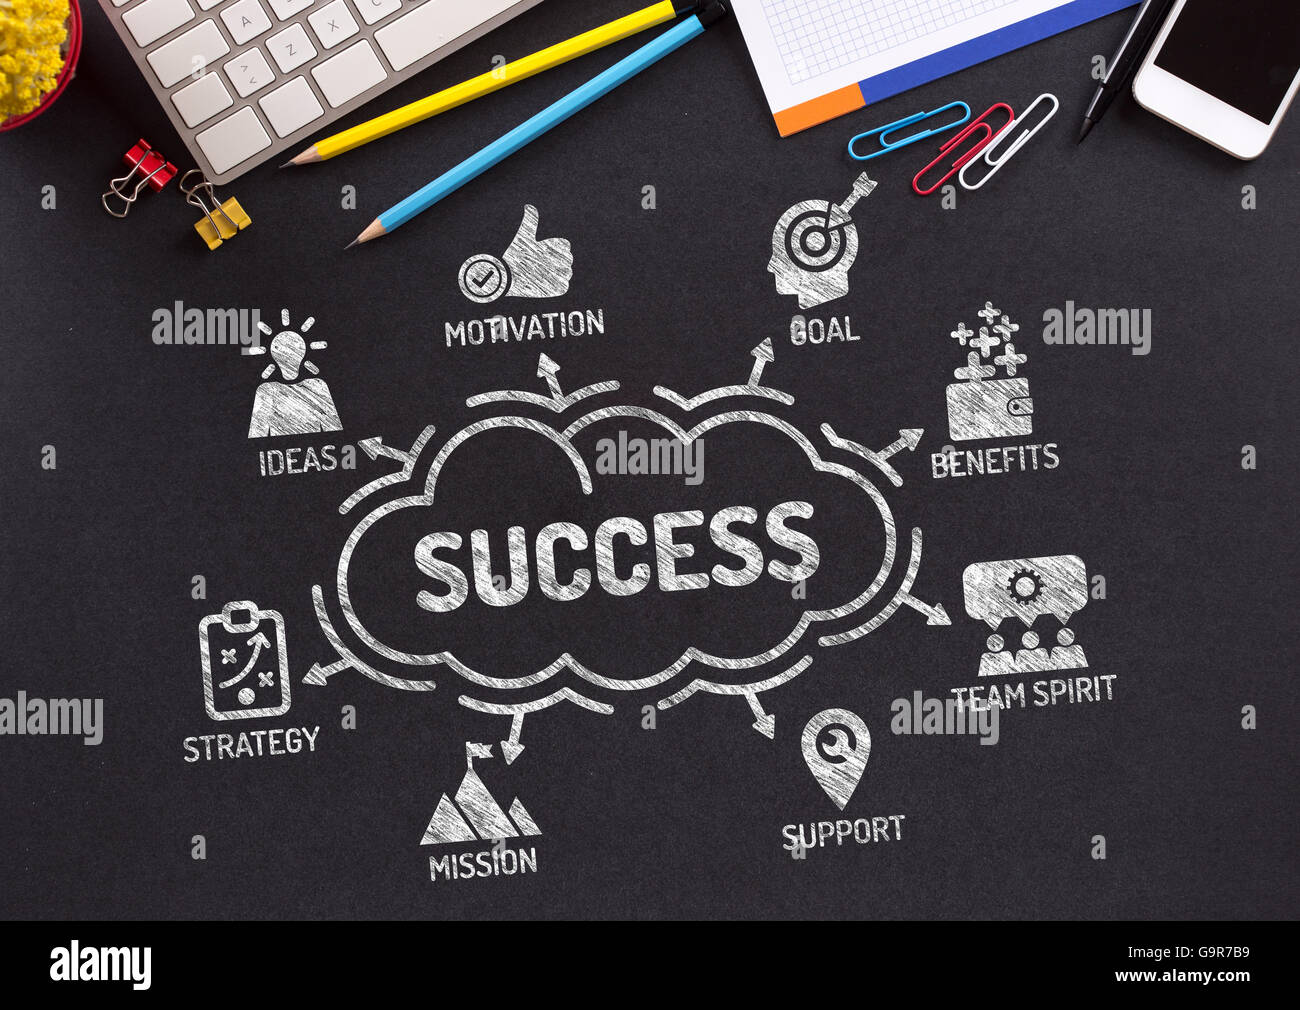 Success Chart with keywords and icons on blackboard Stock Photo